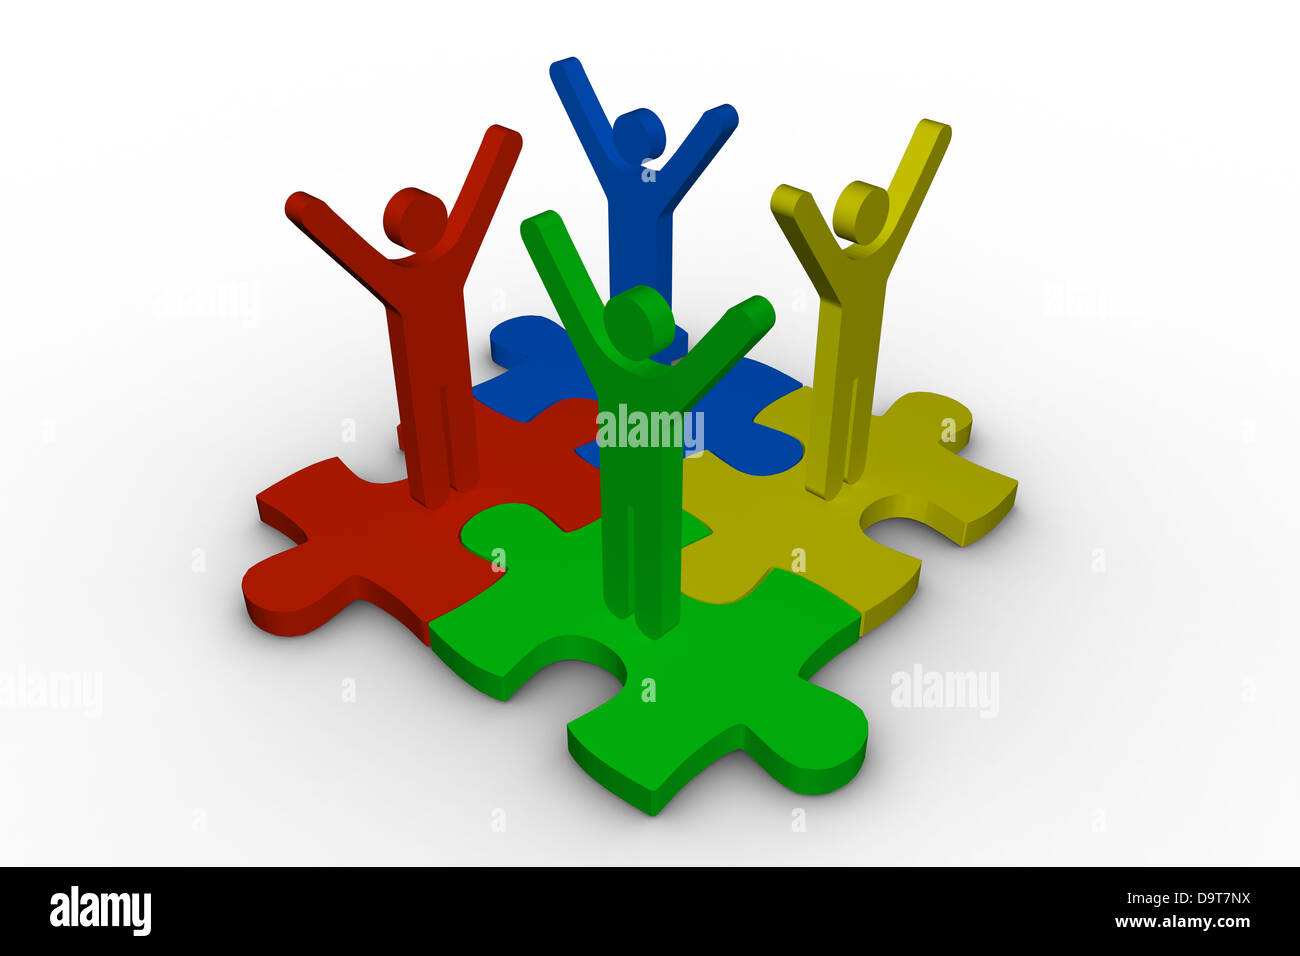 Group of meshed jigsaw pieces with colorful human representation Stock Photo